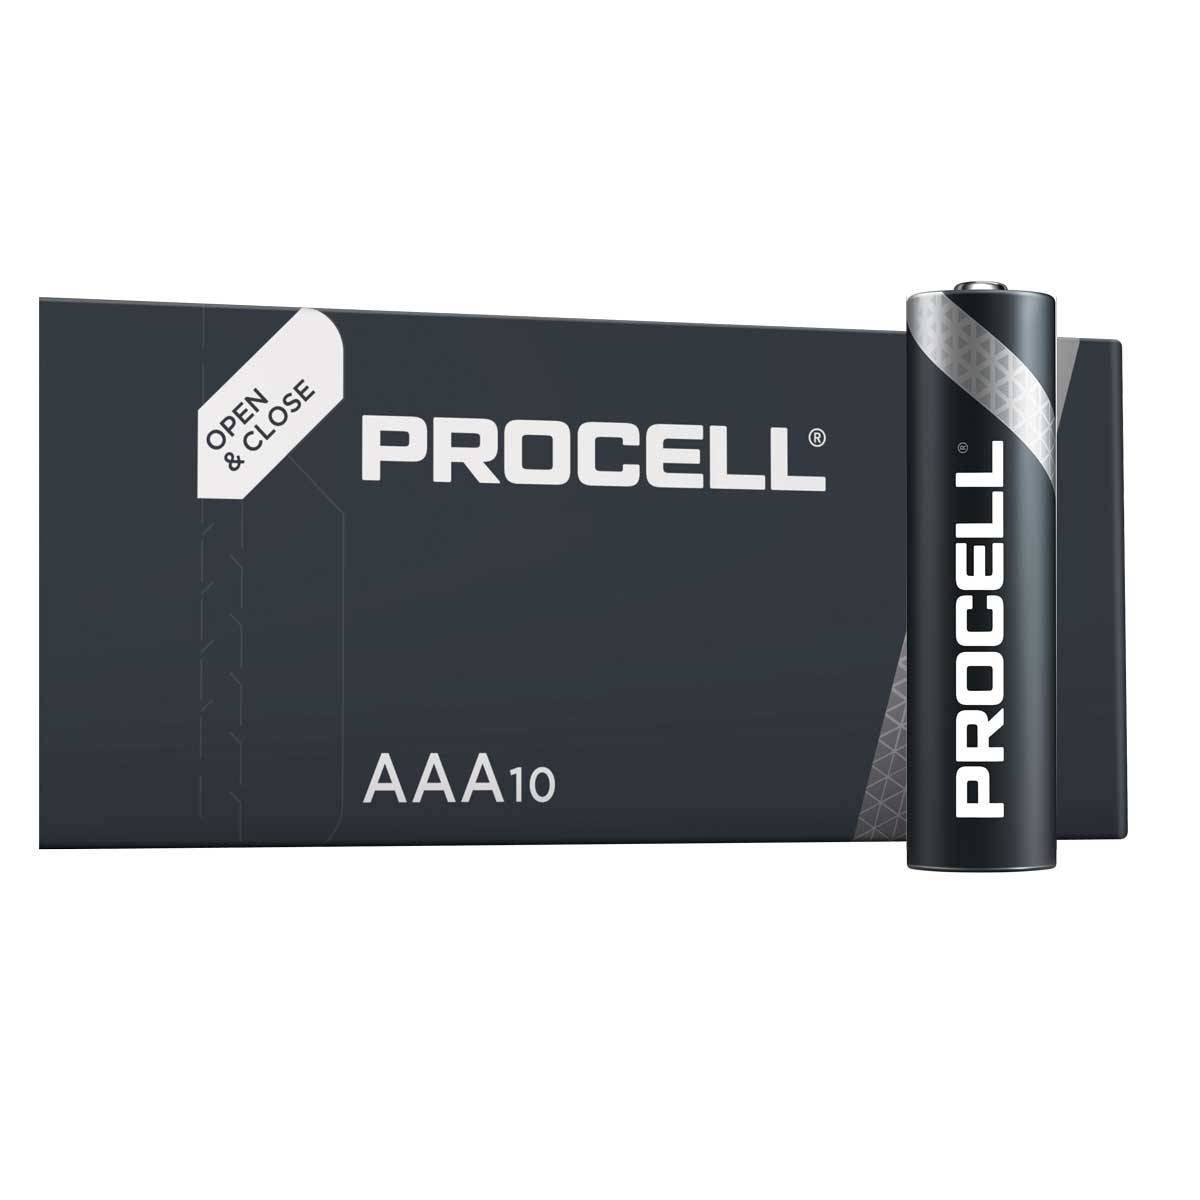 Duracell Procell Alkaline LR3 Micro AAA Battery MN 2400 1.5V 10pcs. (scatola)